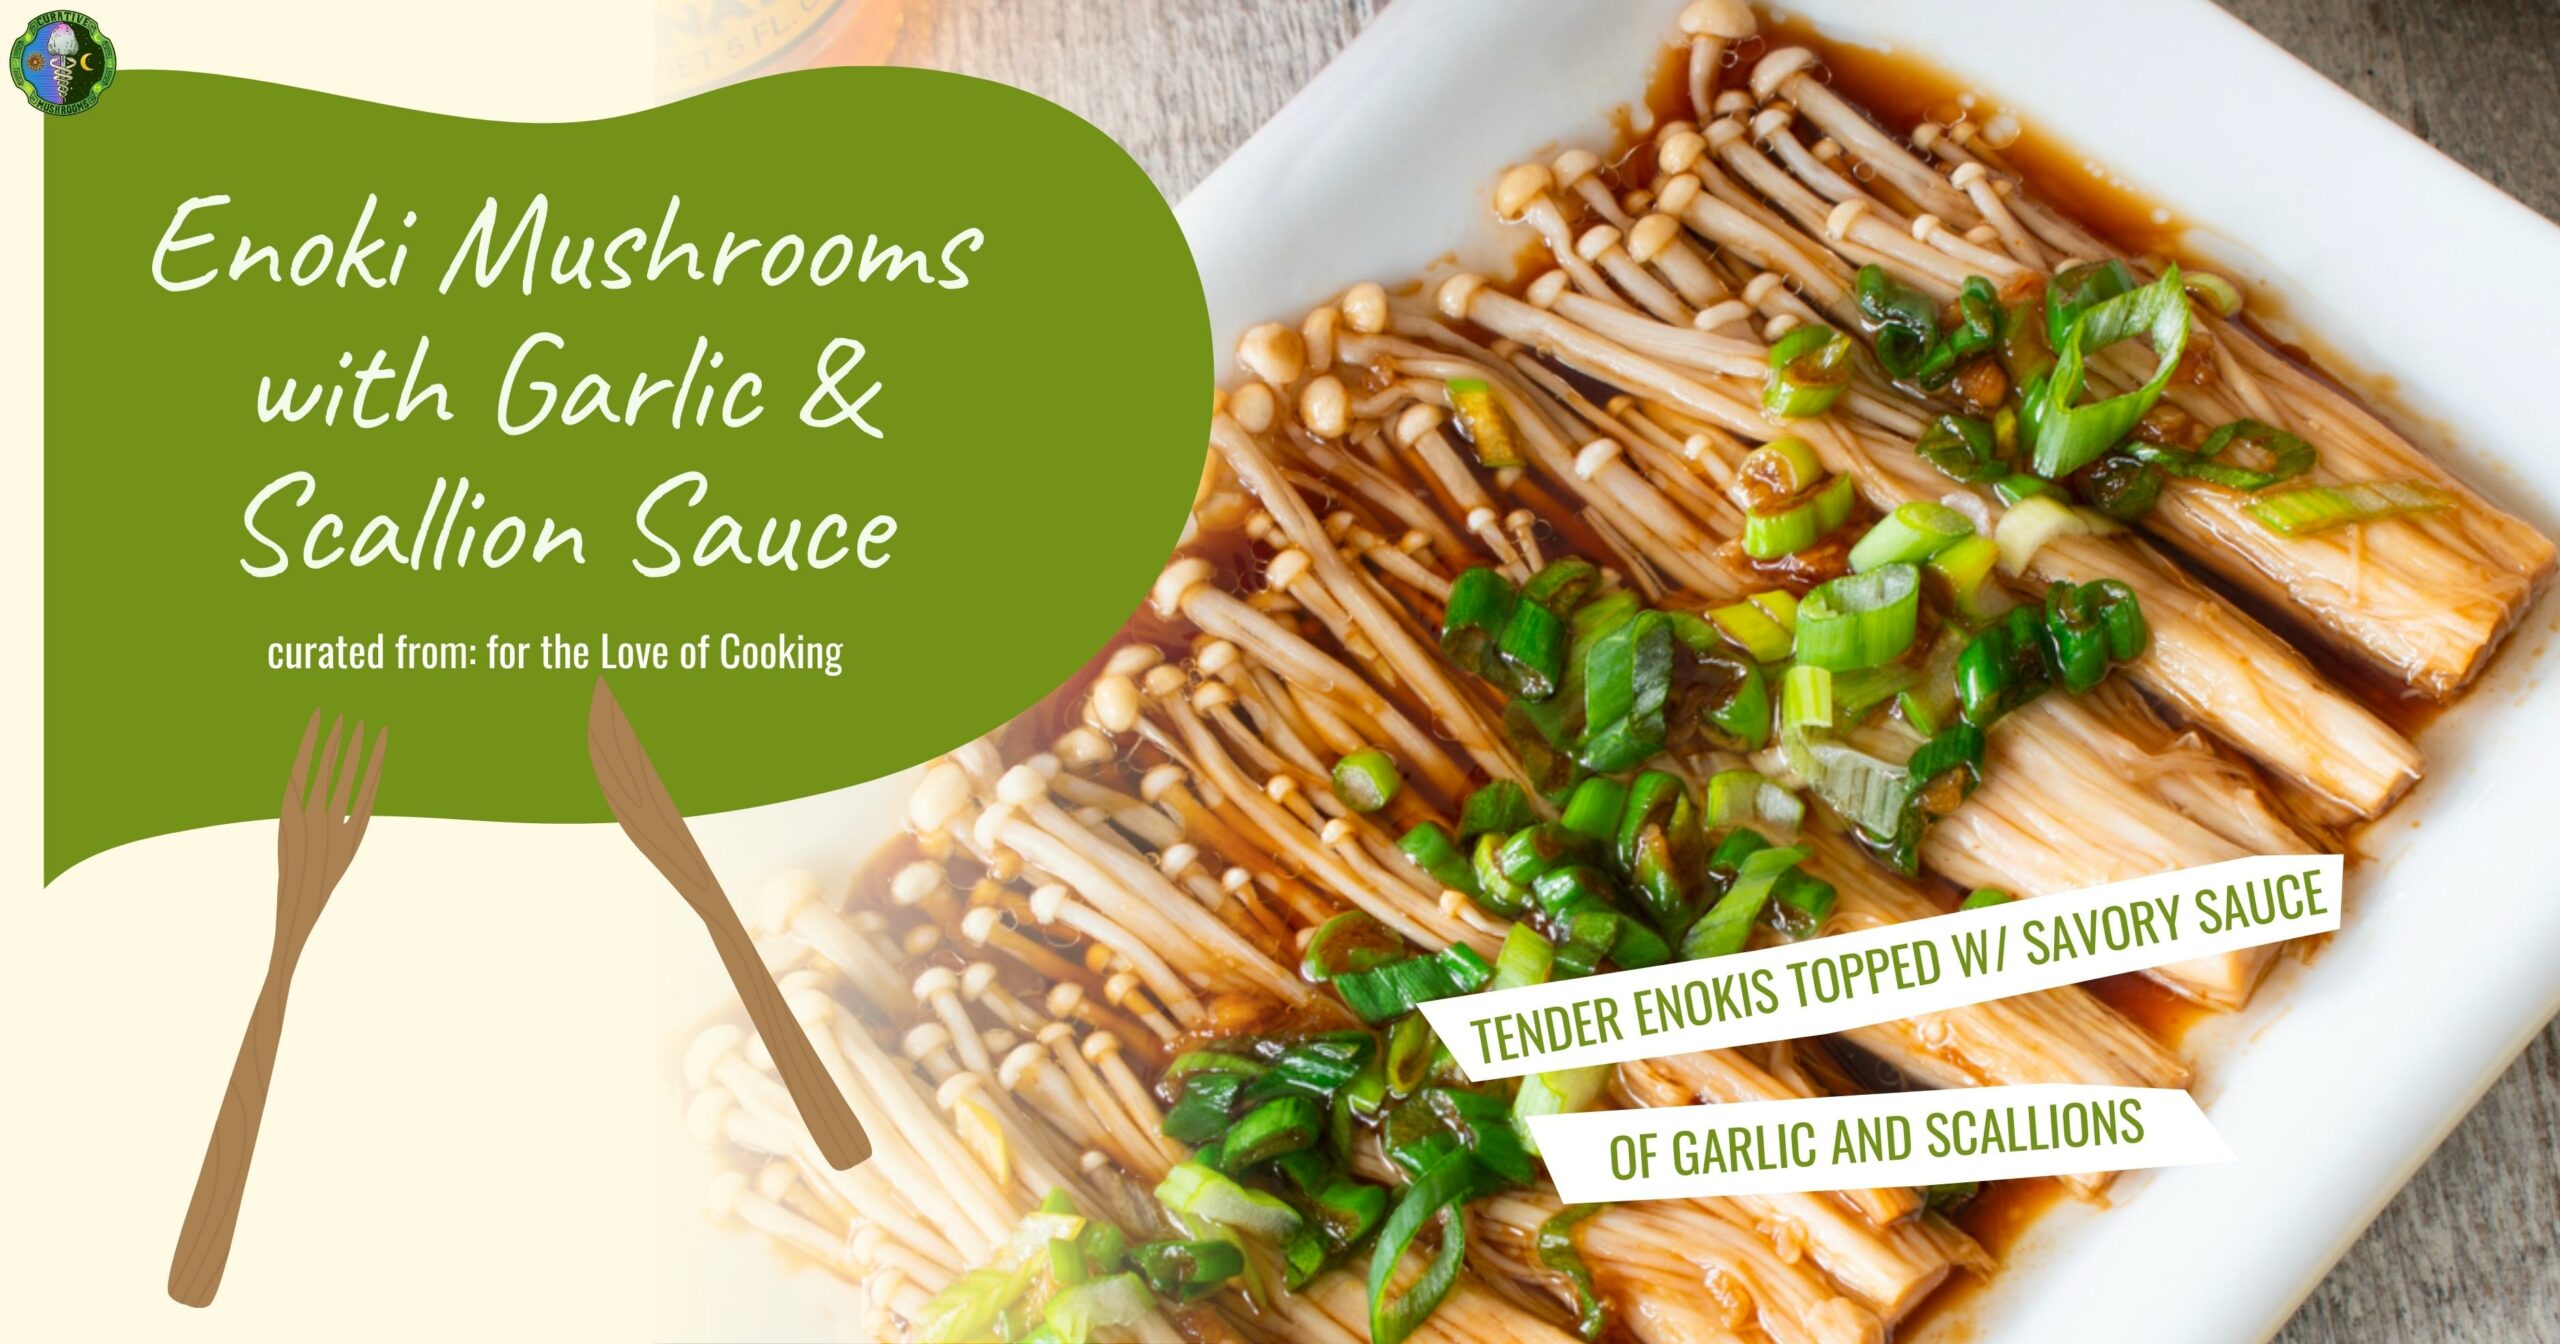 Enoki Mushrooms with Garlic and Scallion Sauce - Easy Delicious Recipe - inspired by for the Love of Cooking